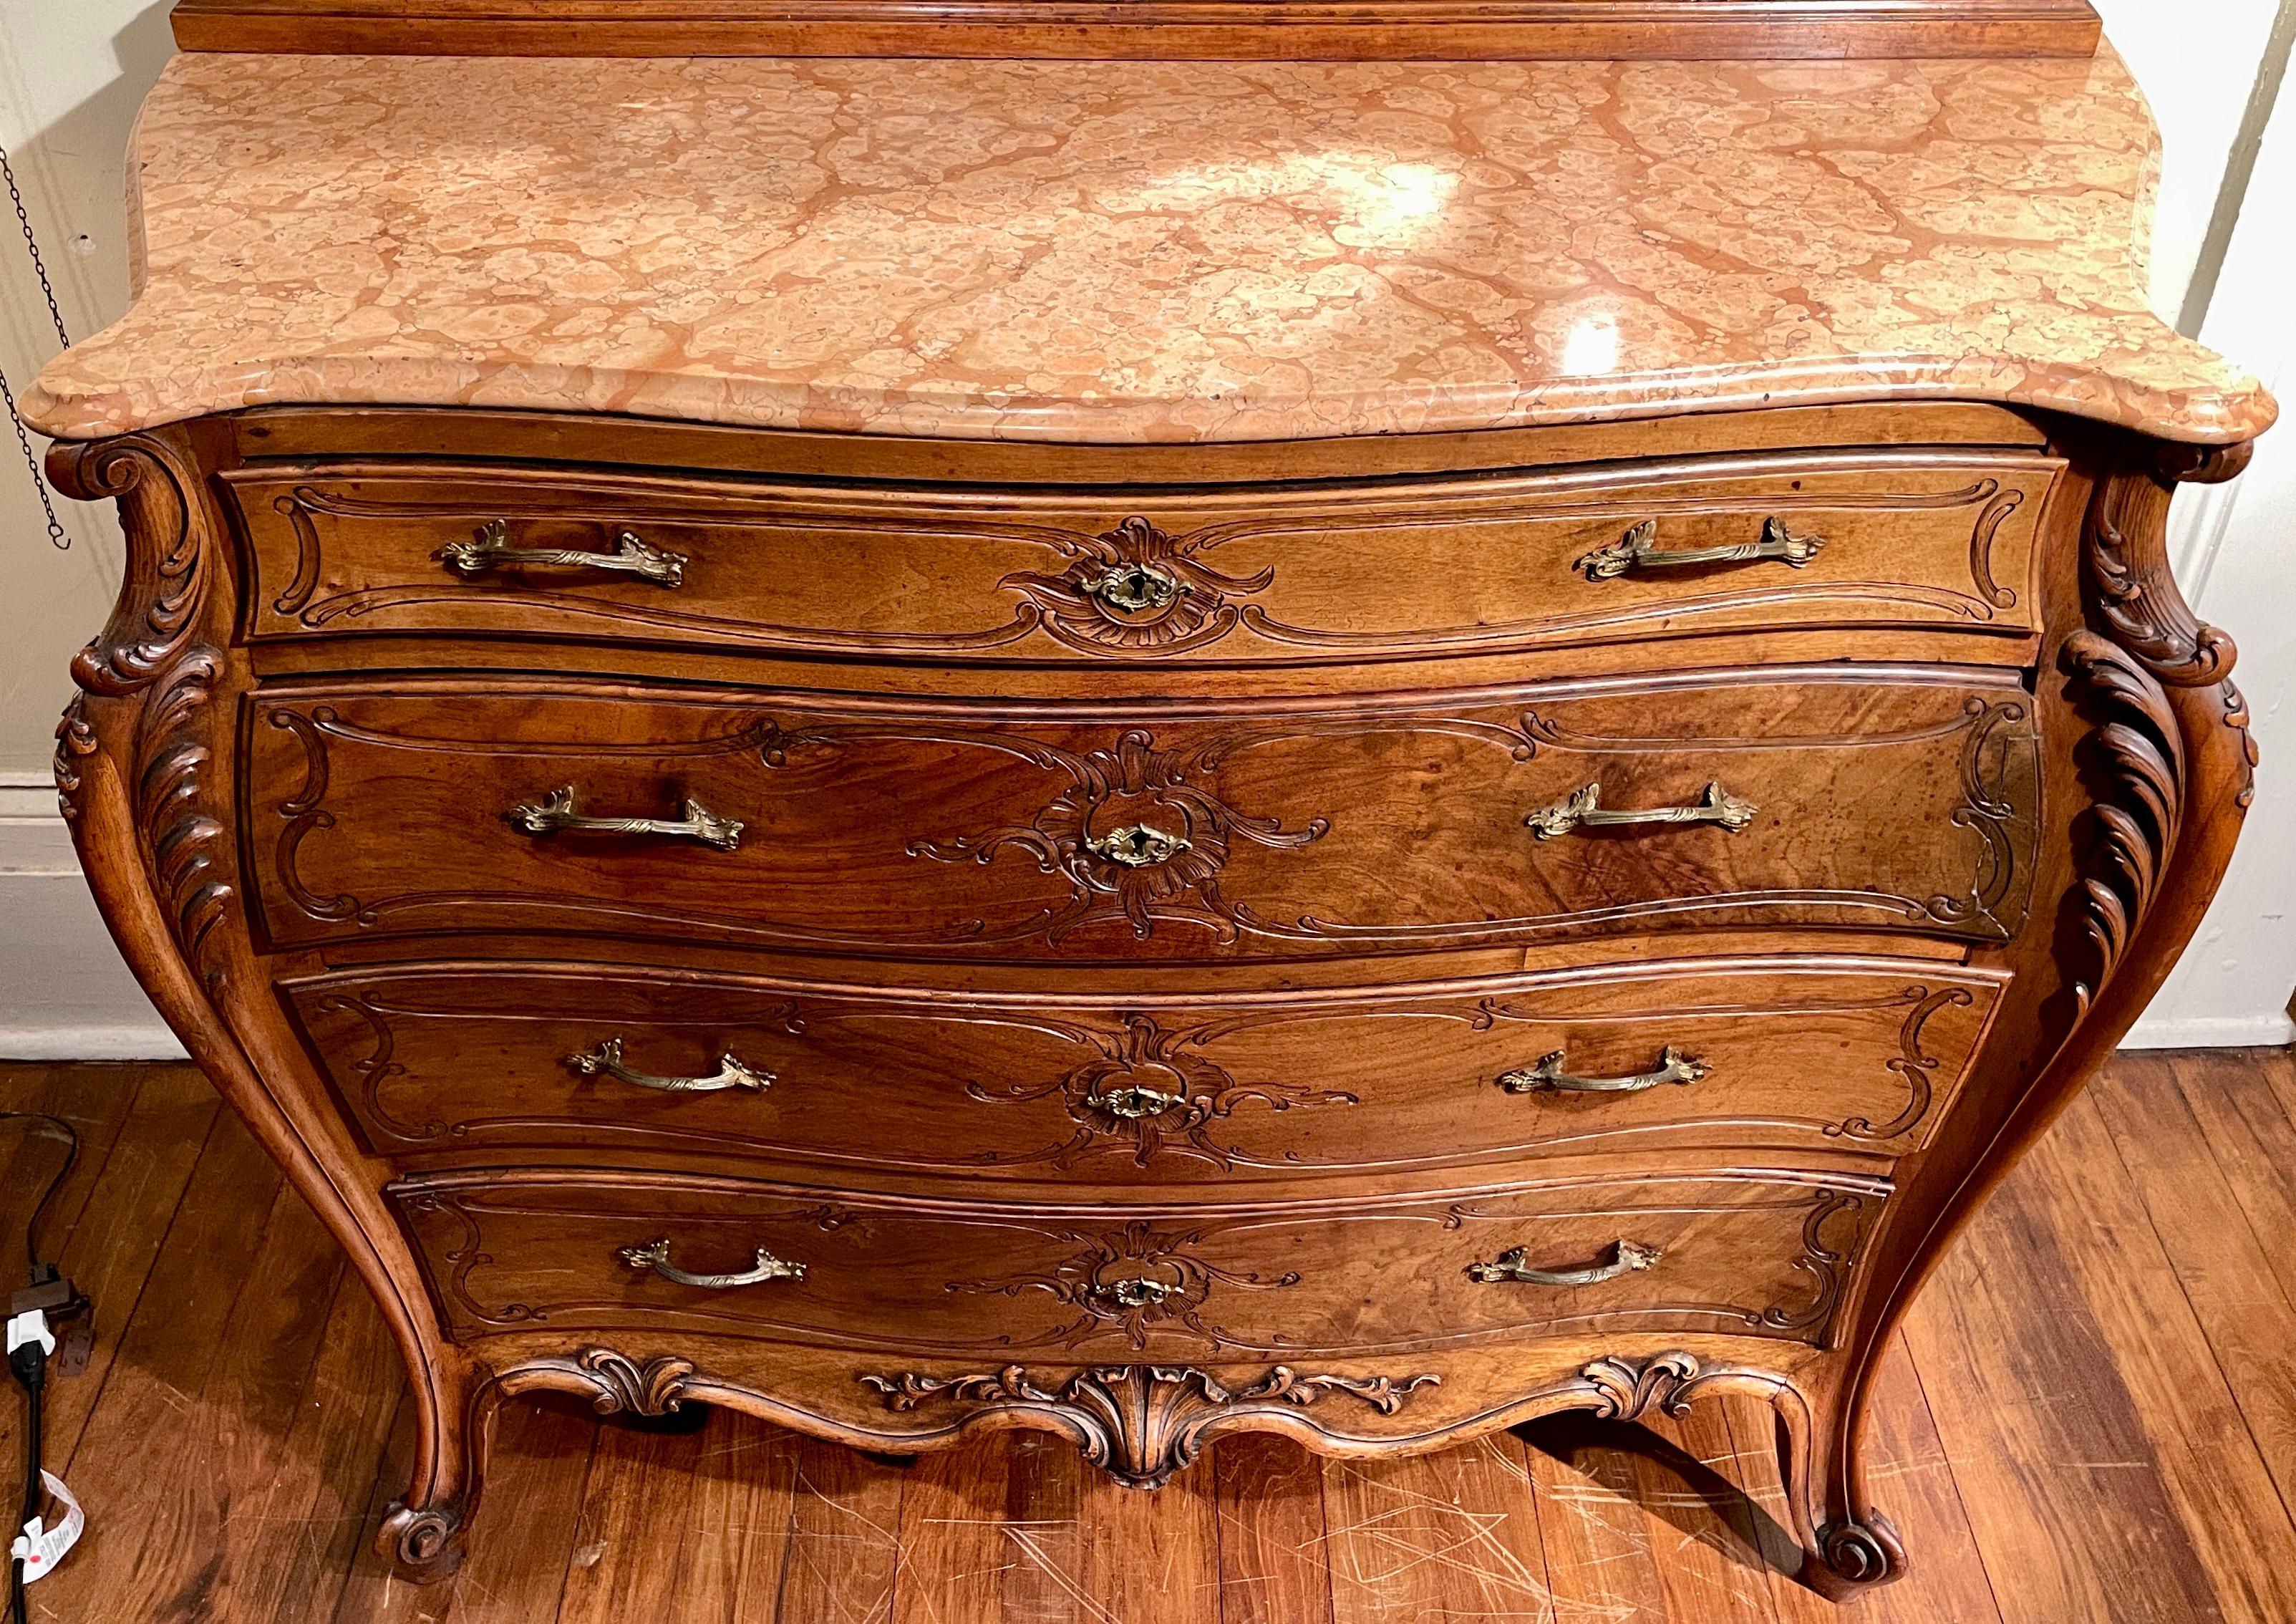 Antique French Walnut & Marble-Top Bombè Chest of Drawers with Mirror Circa 1890 In Good Condition For Sale In New Orleans, LA